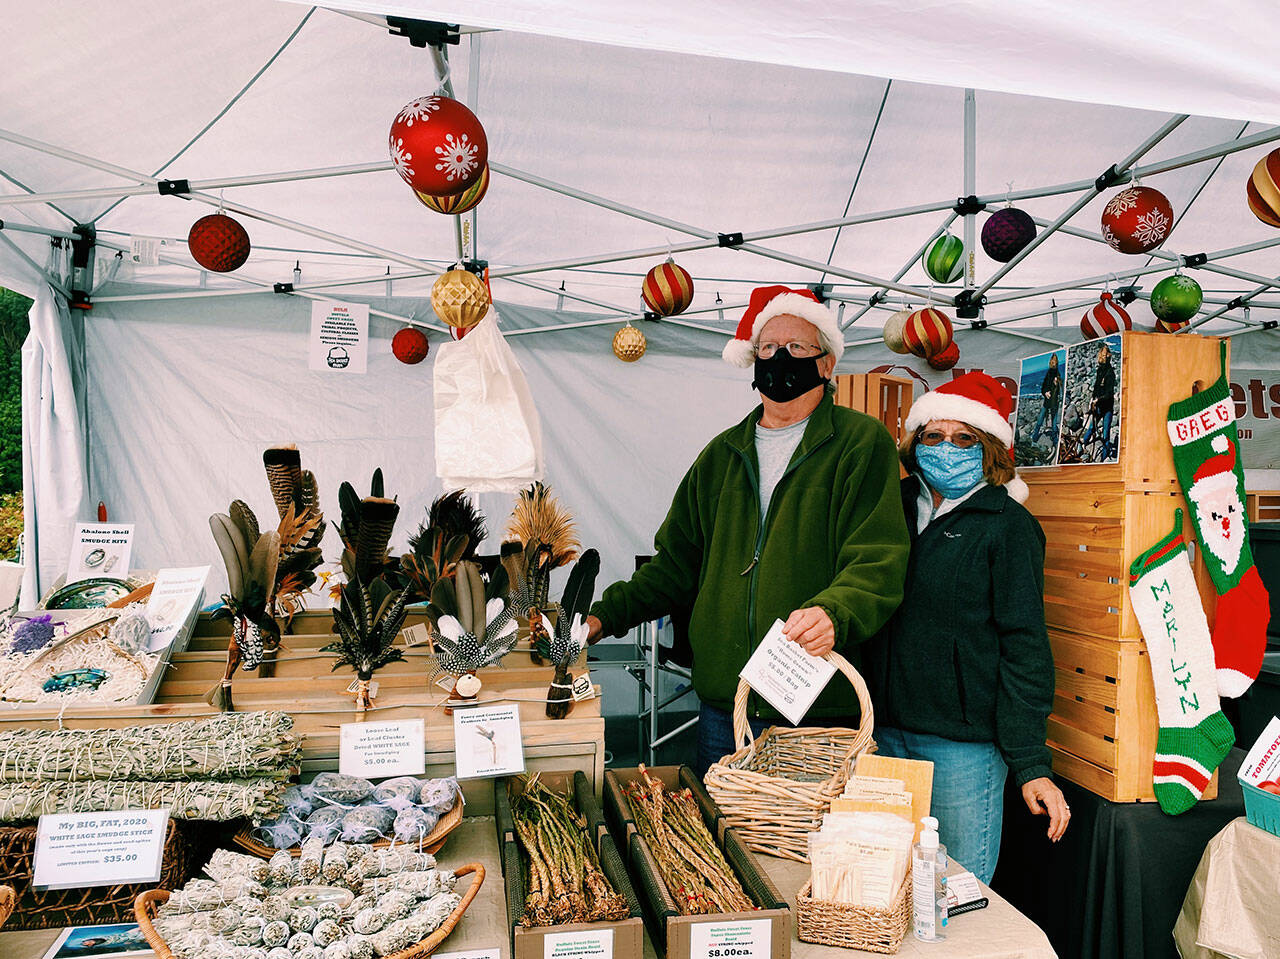 Greg and Marilyn Gundy of Sea Basket Farm spruce up for the holidays at the Sequim Farmers & Artisans Market in 2020. Photo by Emma Jane Garcia